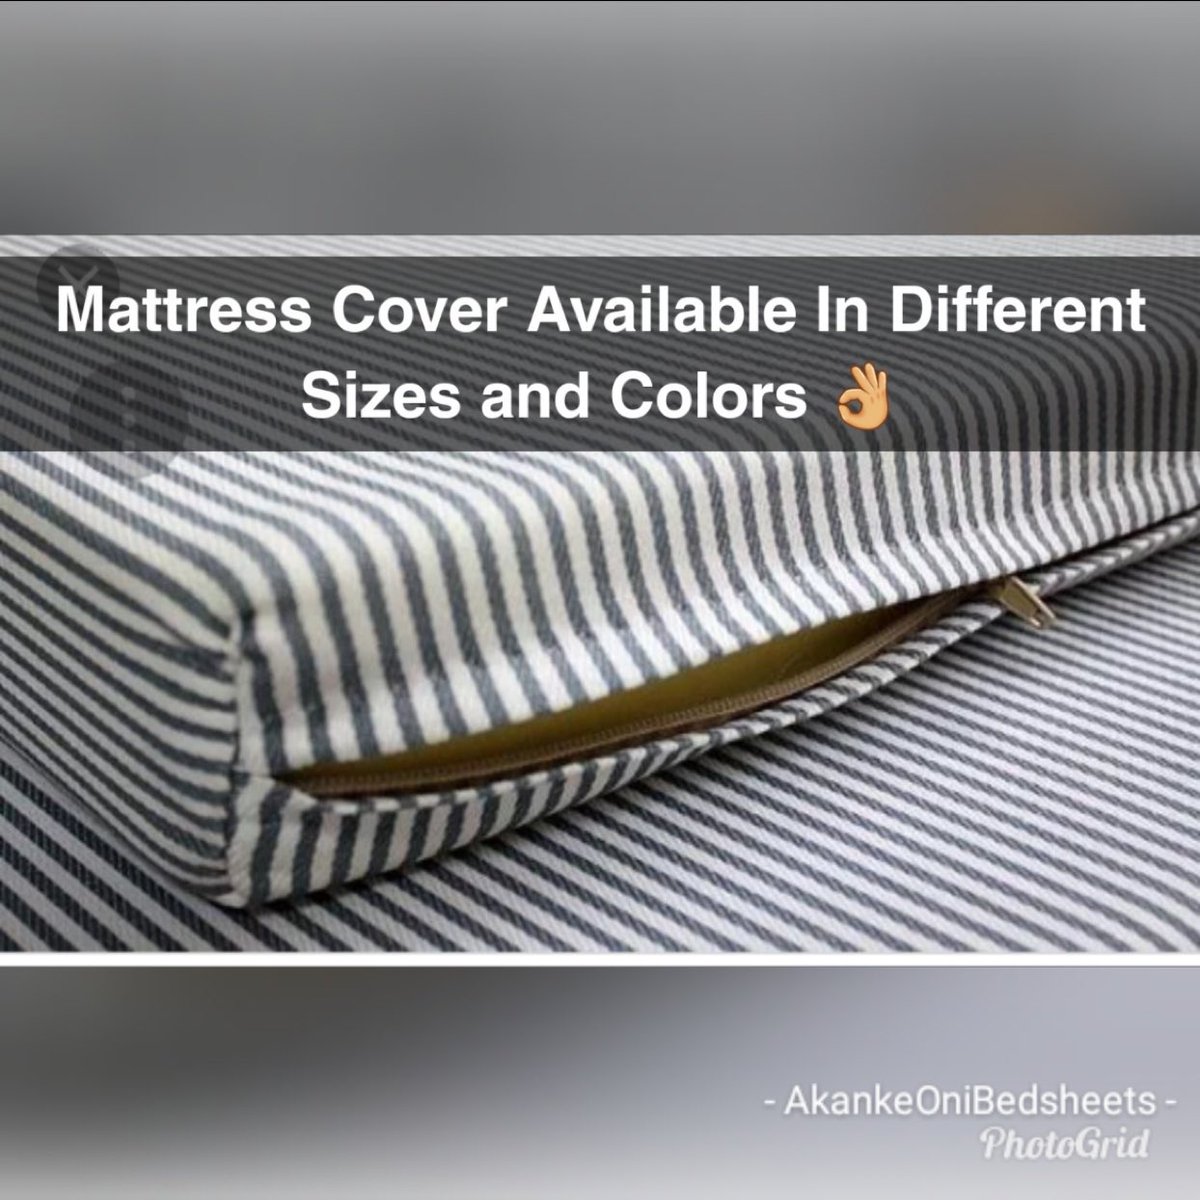 @peng_writer Our mattress cover serves as a shield to your mattress from spills, stains, and everyday wear. Mattress Cover (second grade cotton) 4/6 - 18,000 6/6 - 20,500 6/7 - 22,500 7/7 - 24,000 7/8 - 26,000